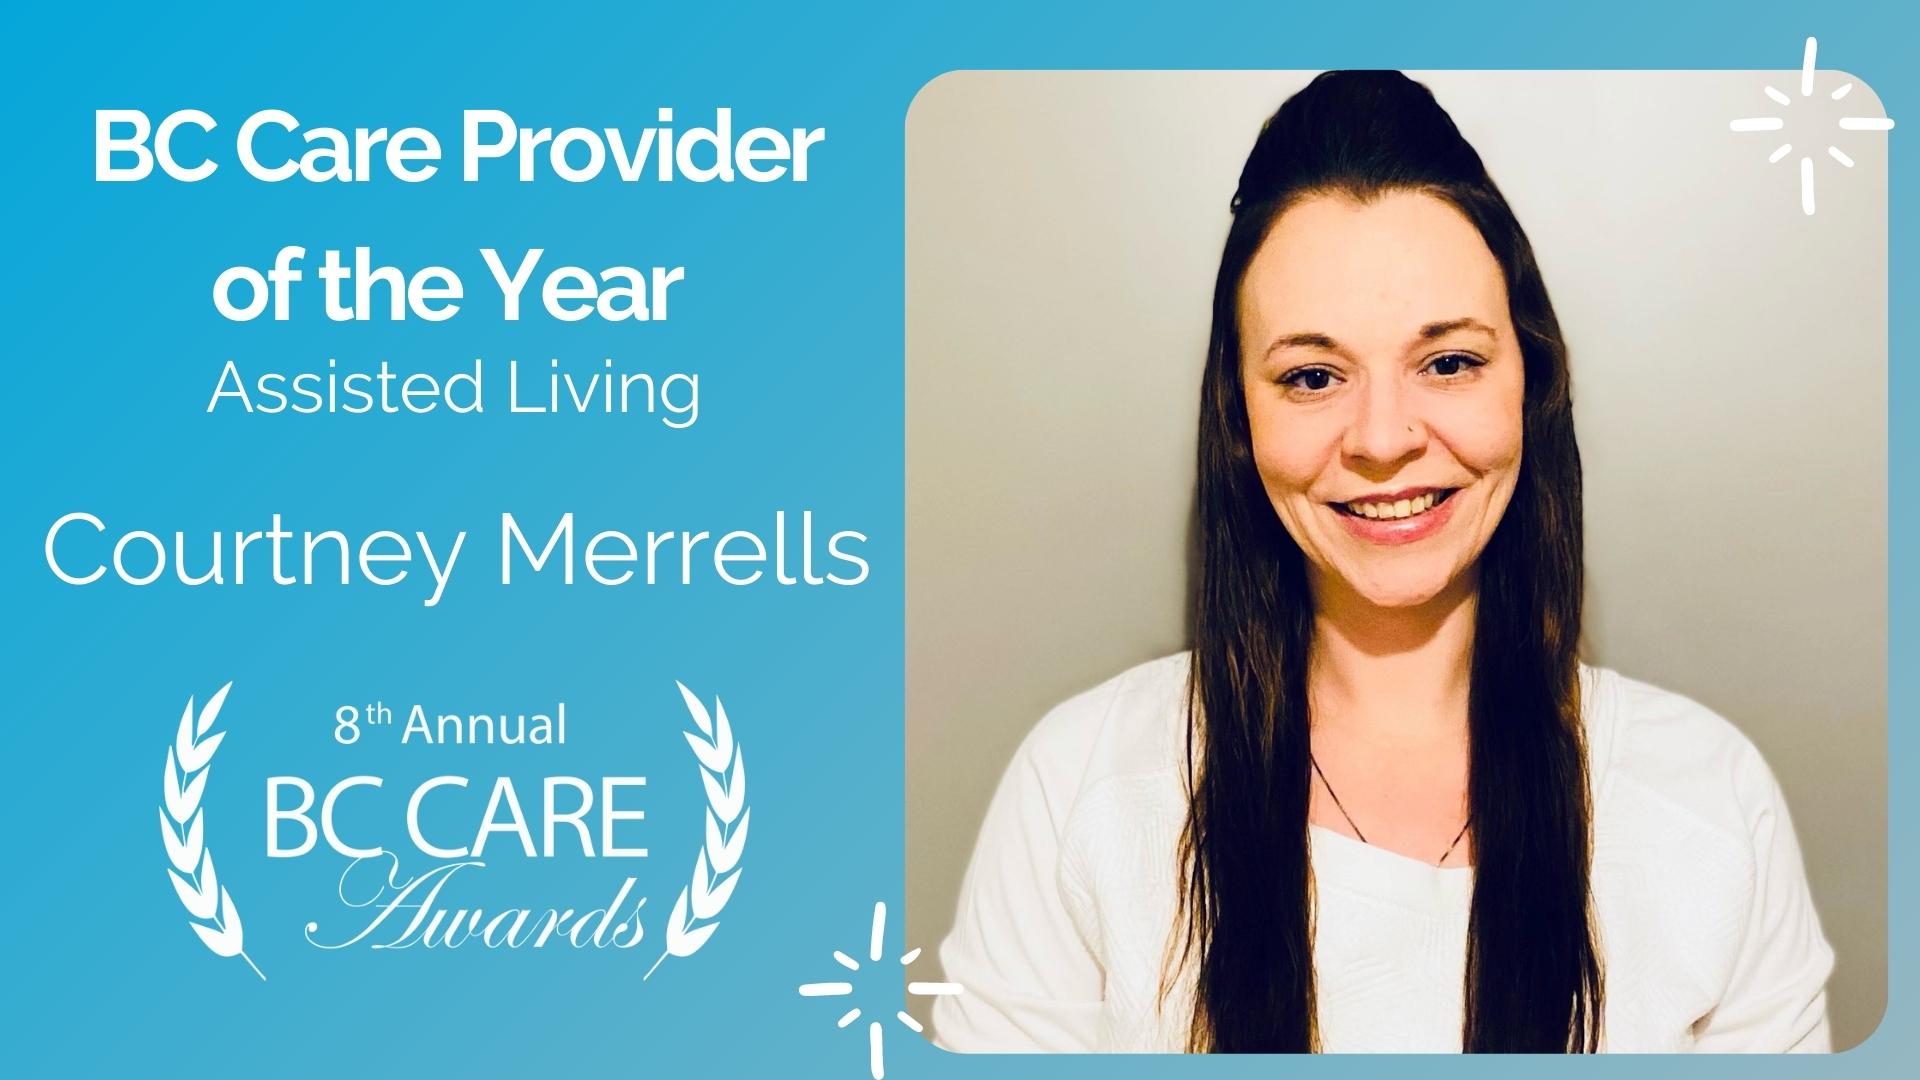 Congratulations, Courtney Merrells! Winner of the BC Care Provider of the Year award (Assisted Living category)